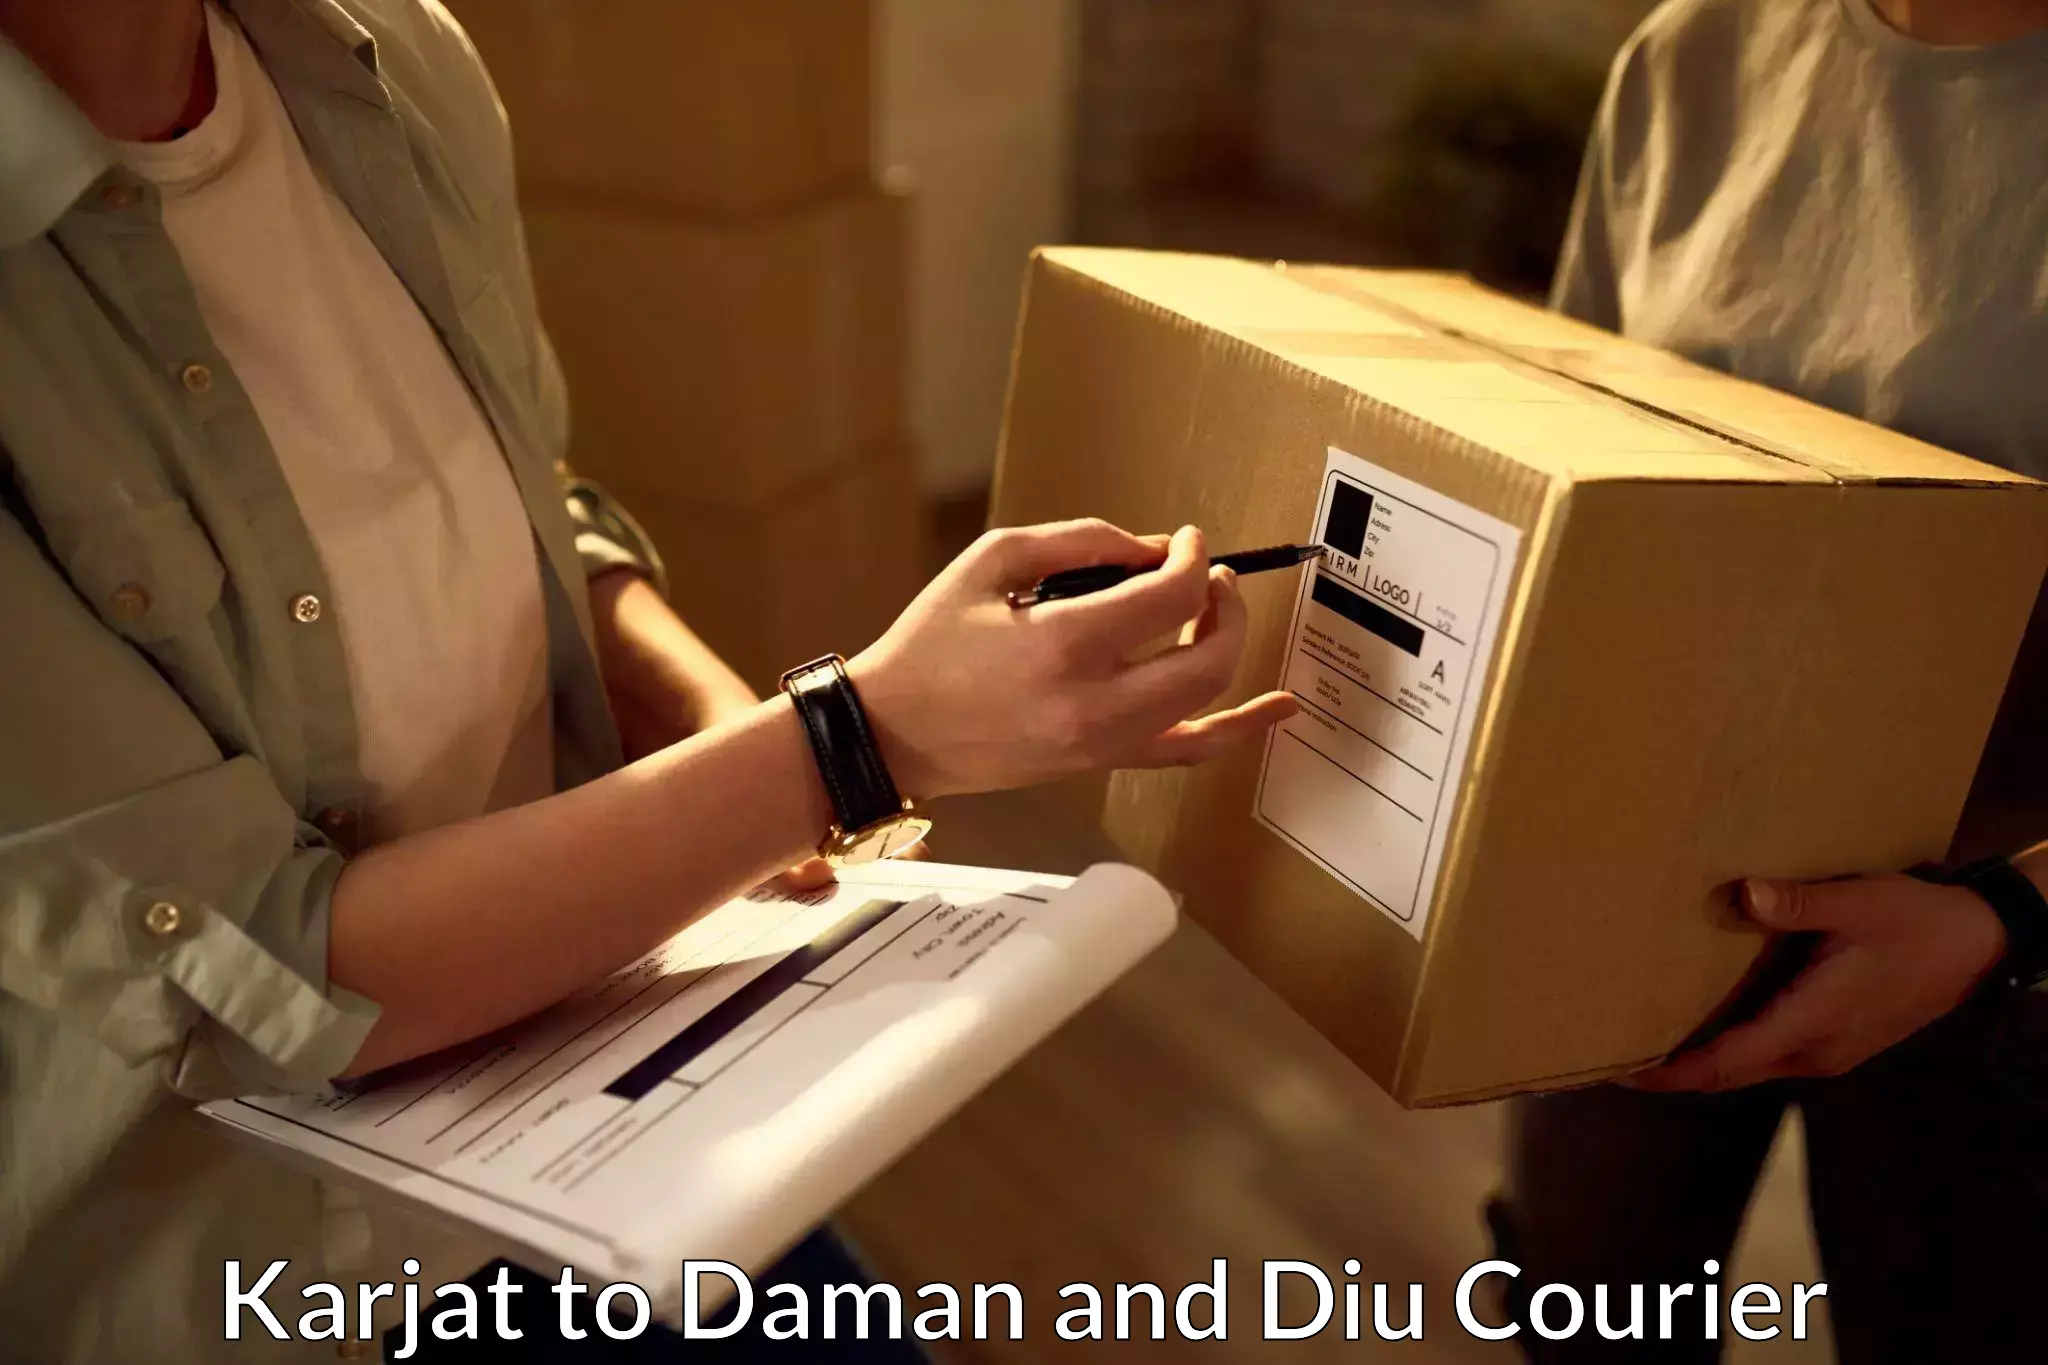 Reliable delivery network Karjat to Daman